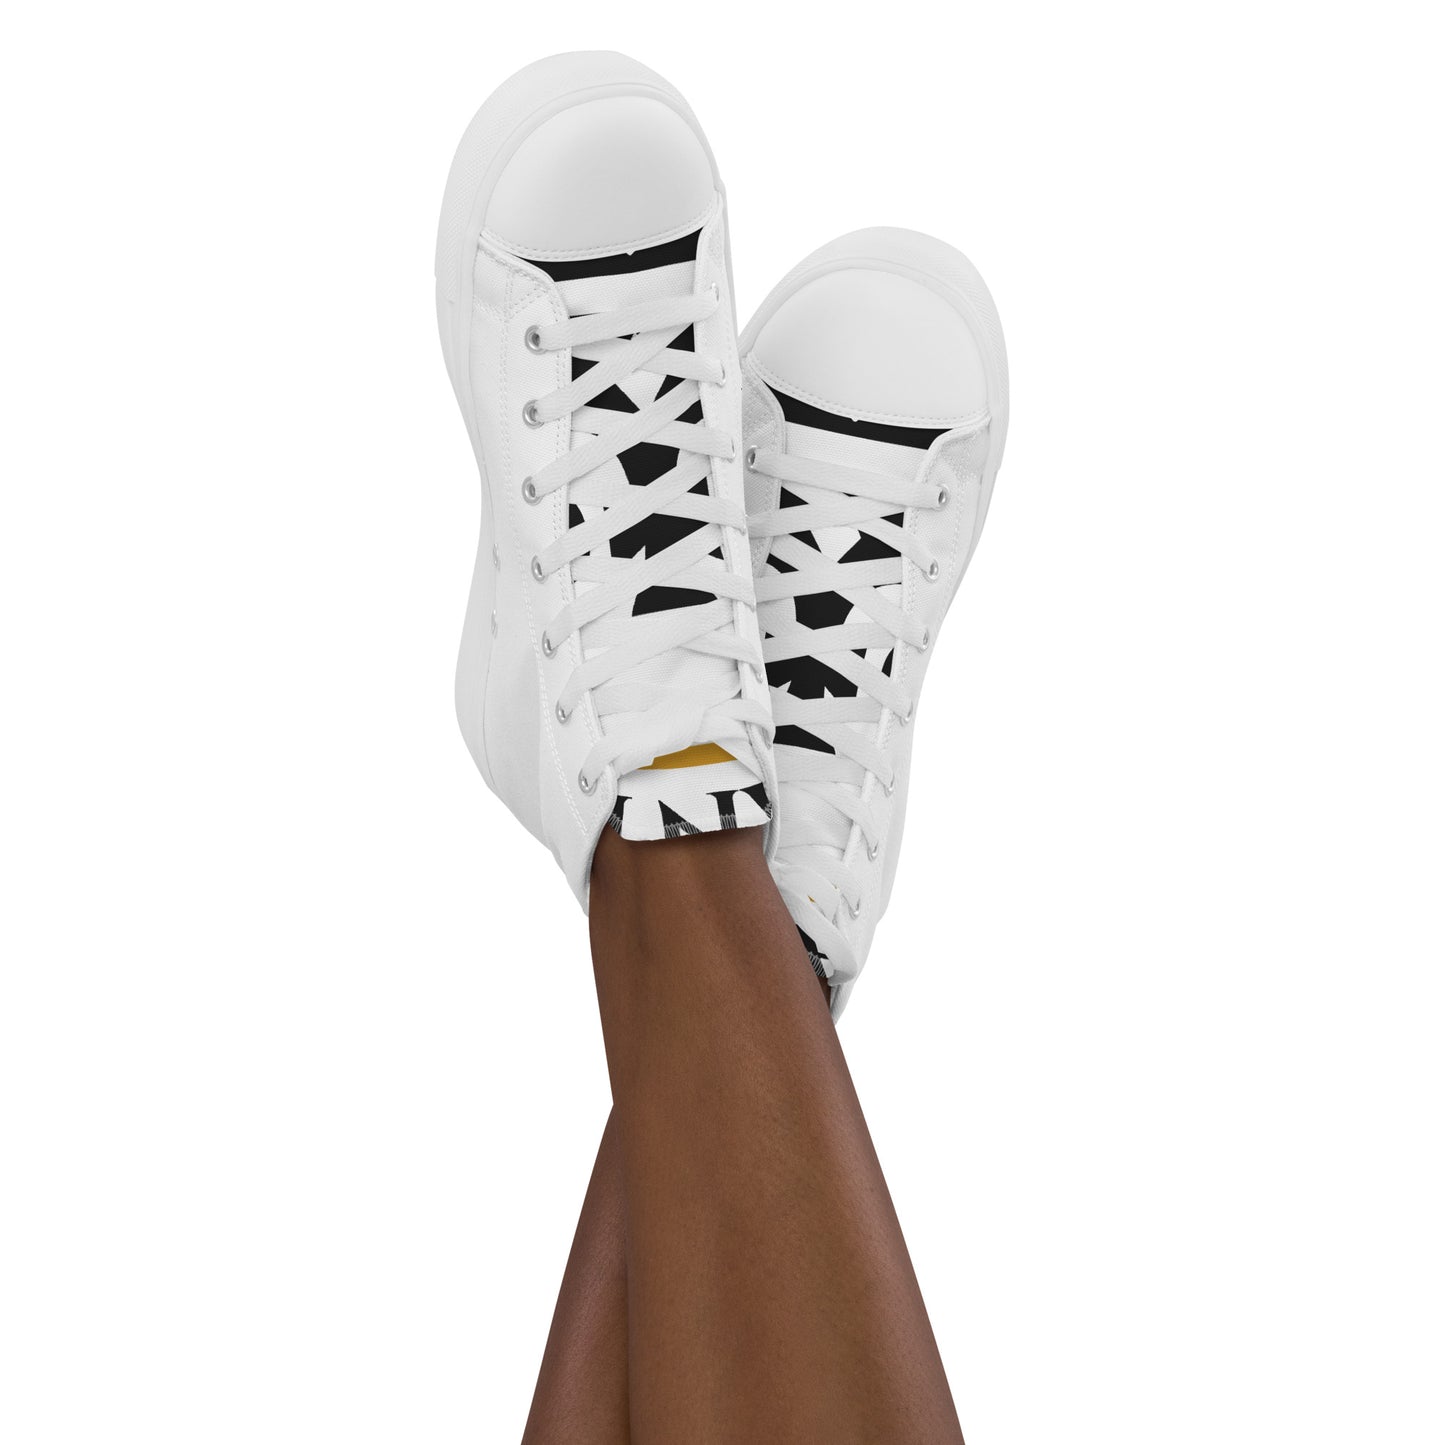 Black and Gold/ White Pageant Life Certified Women’s high top canvas shoes